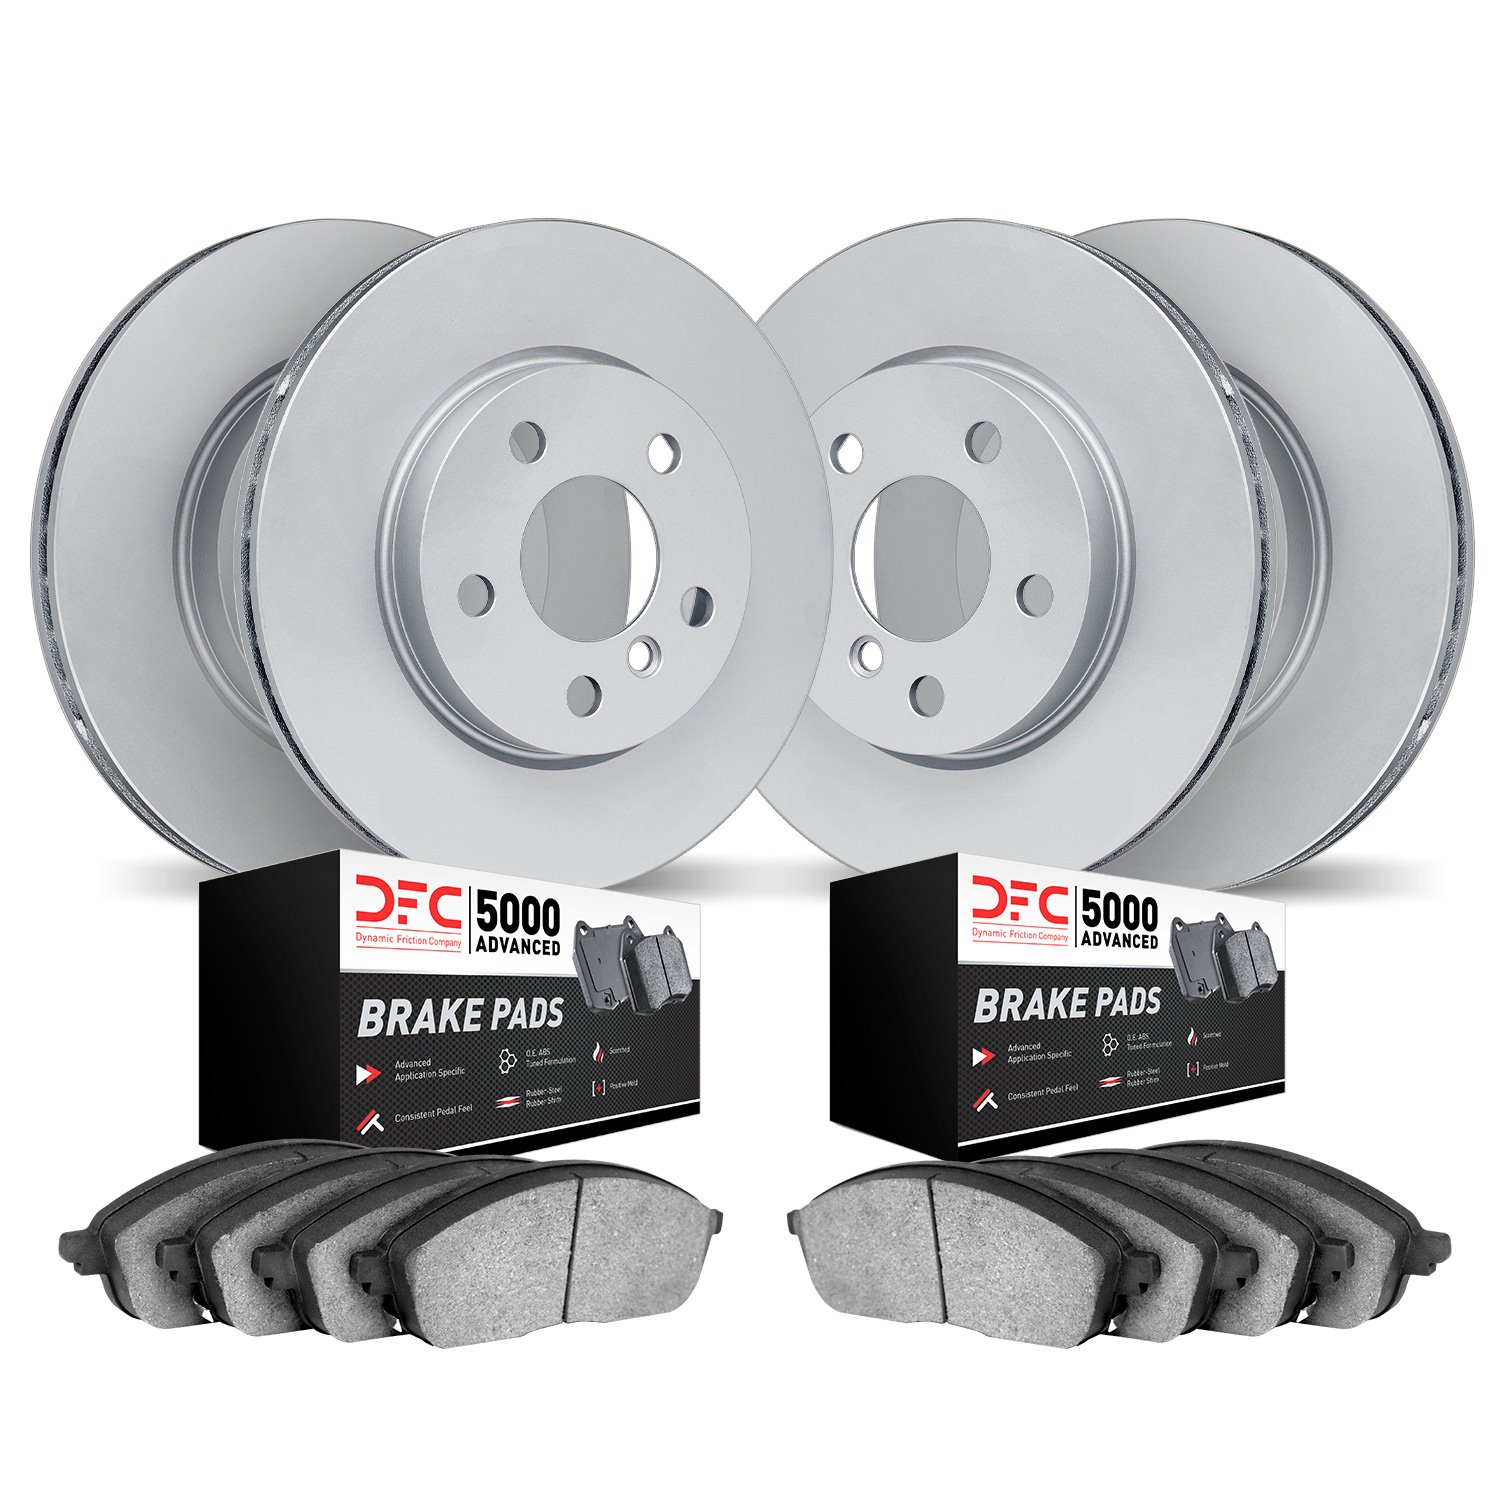 9504-73075 GEOMET Brake Rotors w/5000 Advanced Brake Pads Kit, Fits Select Audi/Volkswagen, Position: Front and Rear